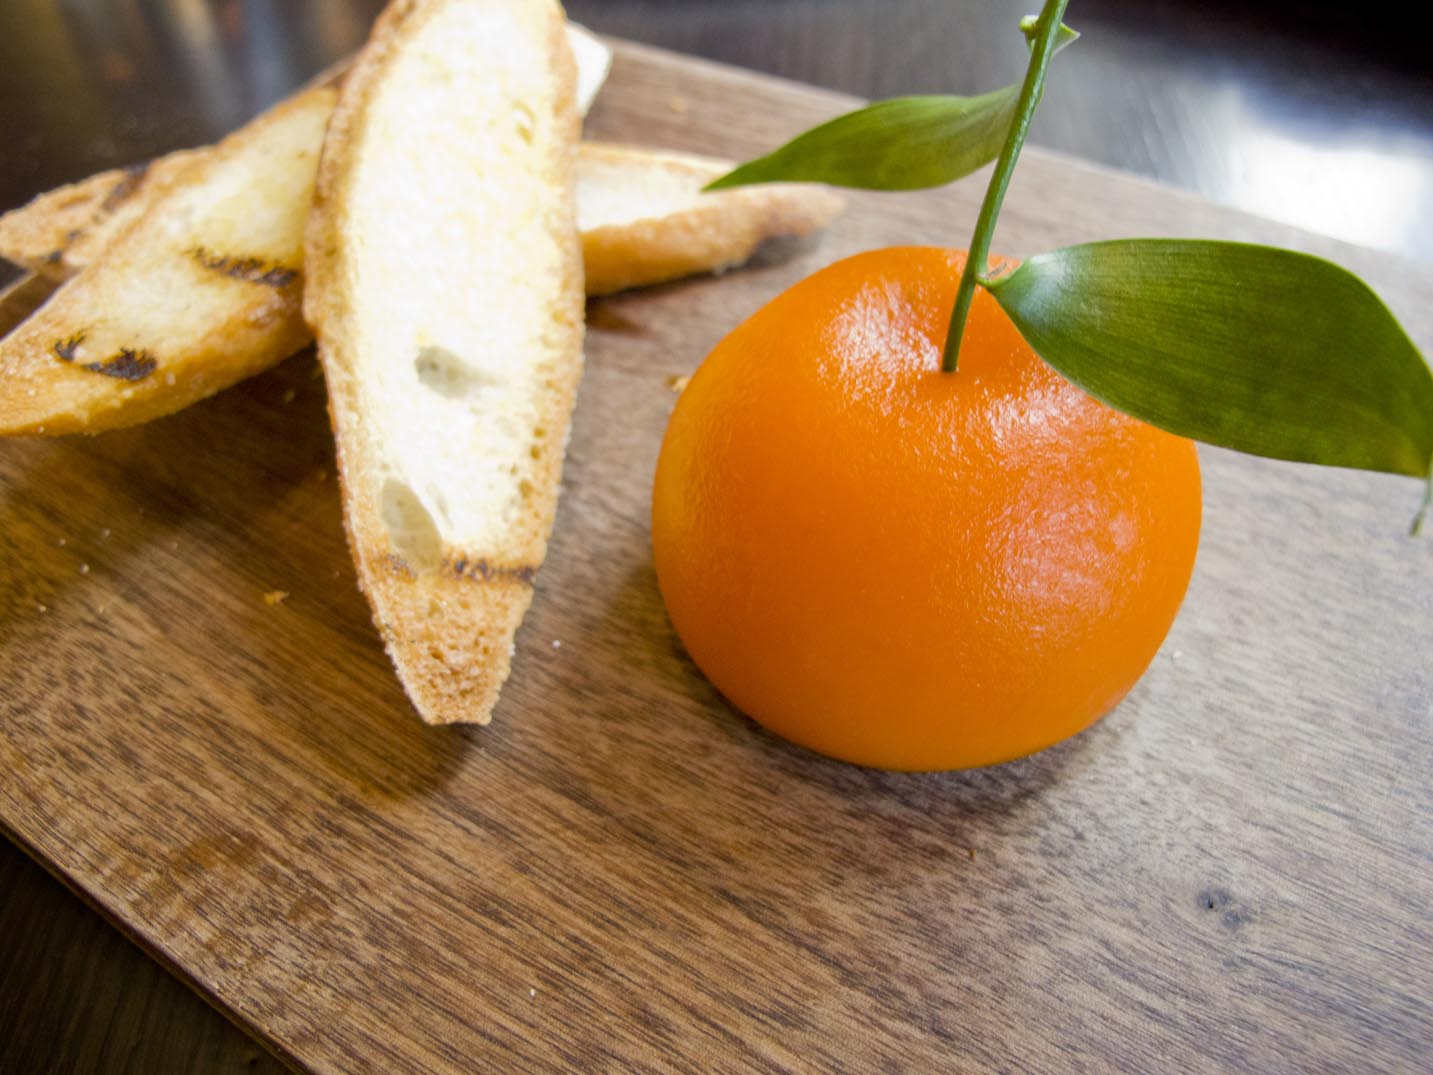 "Meat fruit" as served at Dinner by Heston Blumenthal in London, England